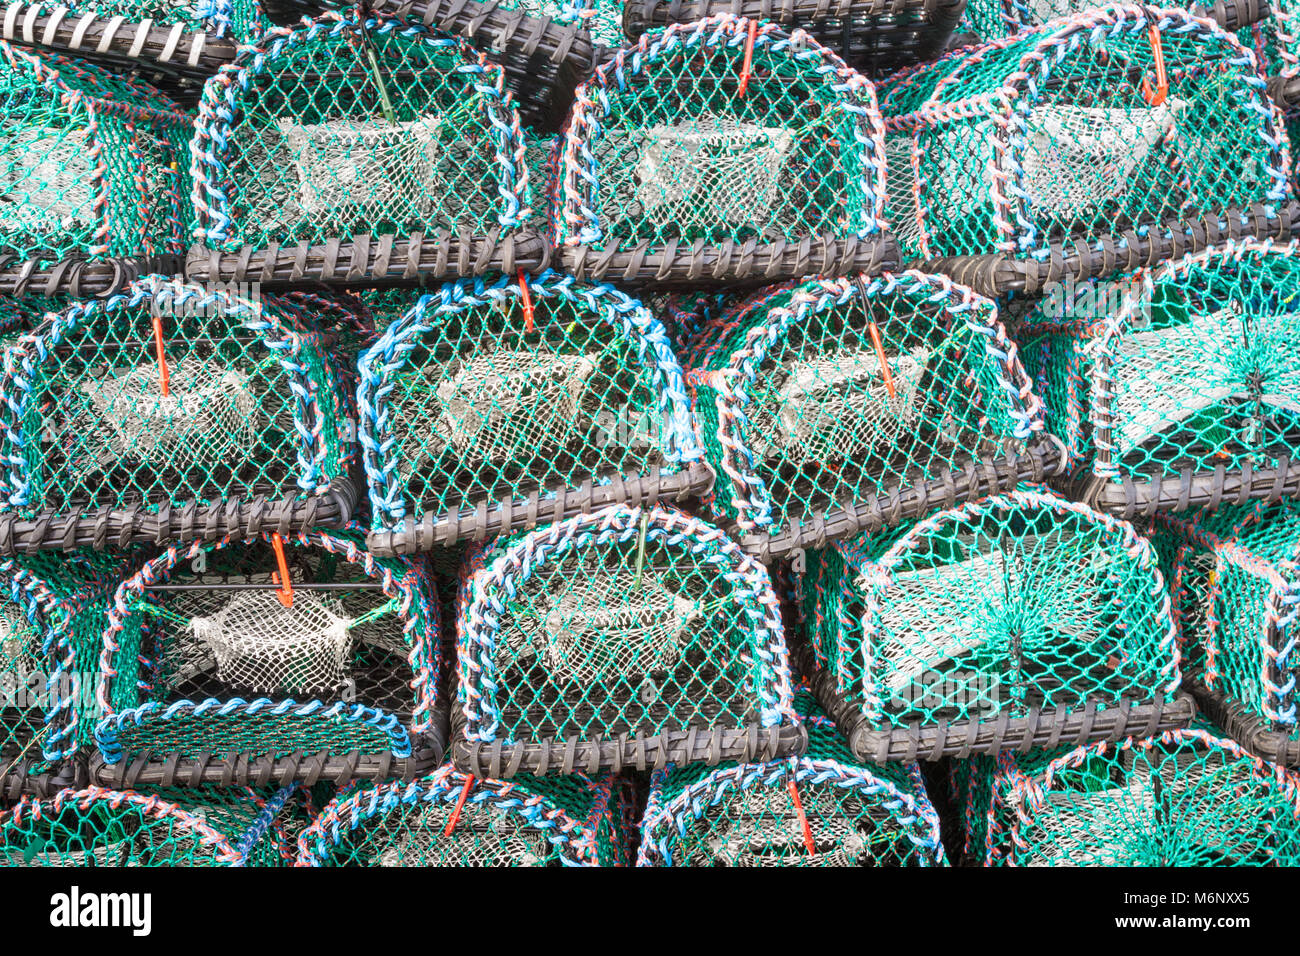 Lobster pots or cages in a stack uk Stock Photo